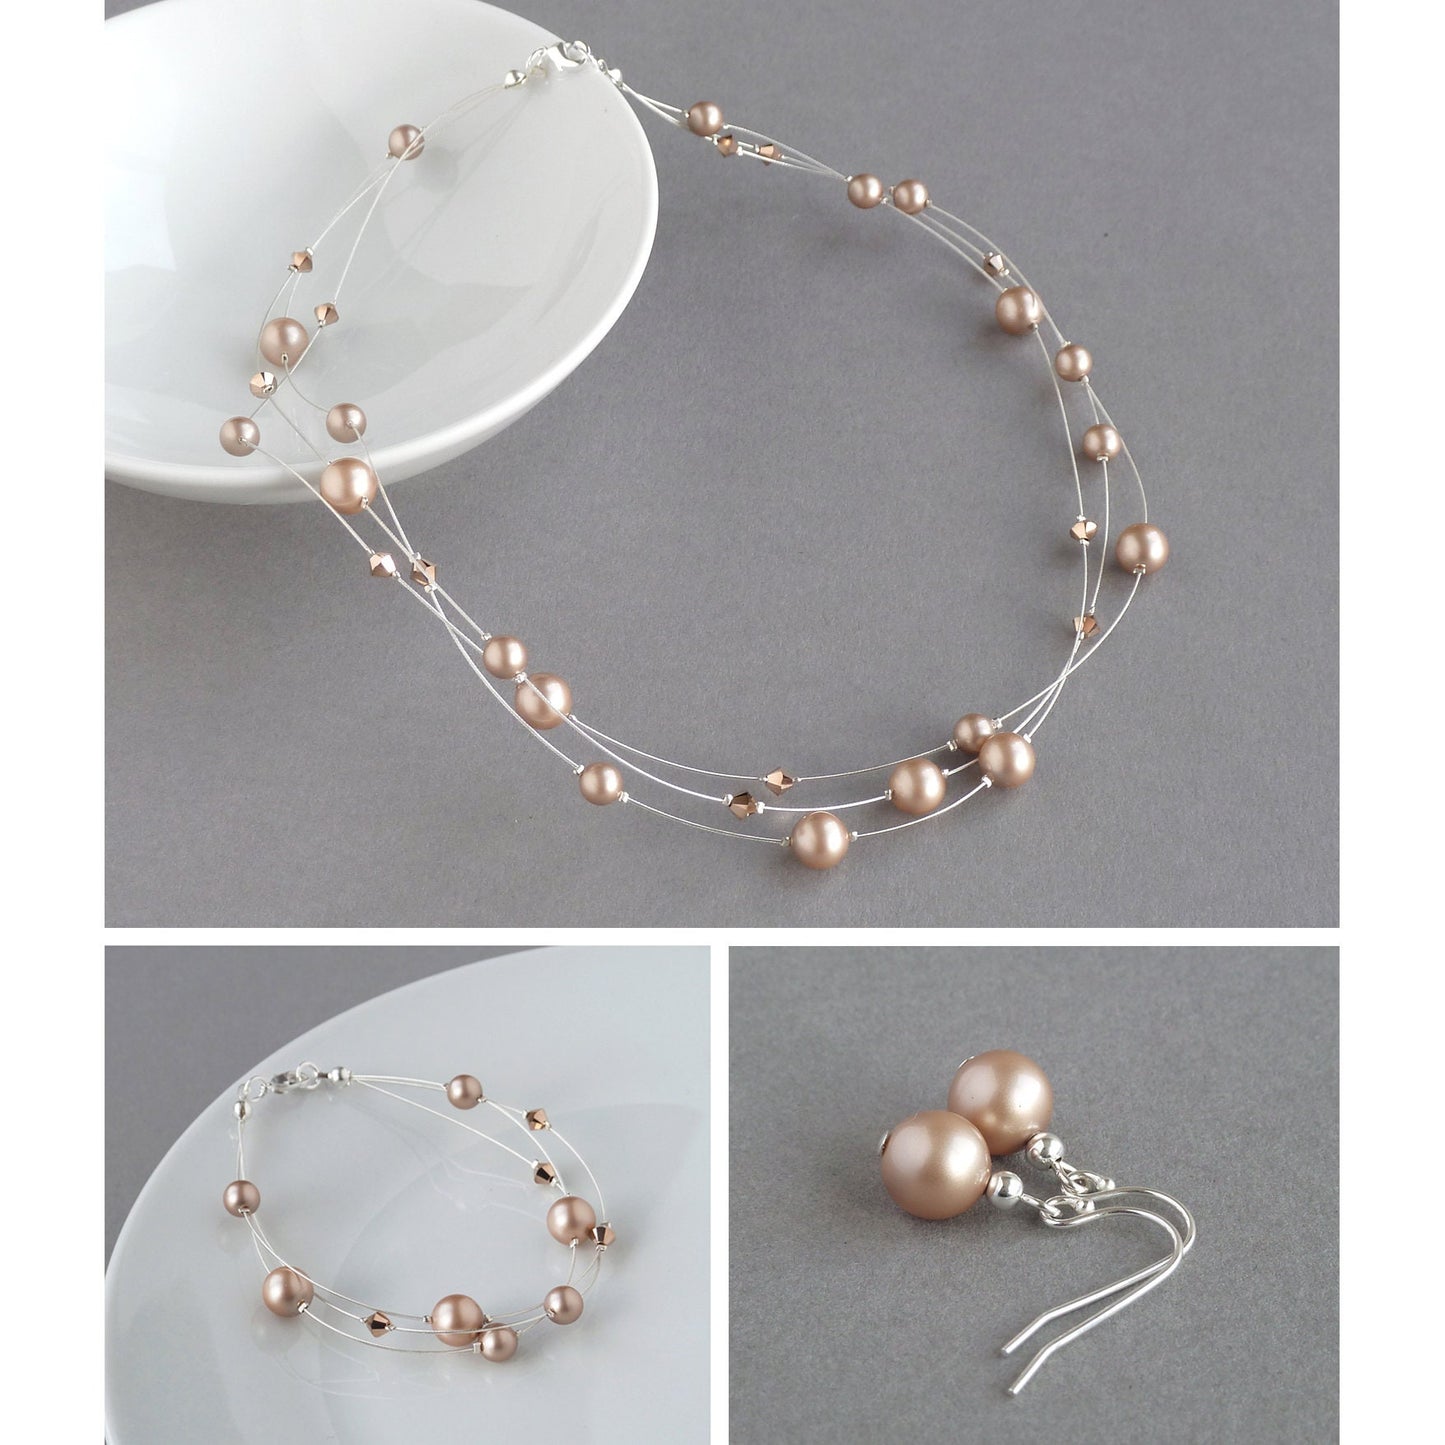 Rose Gold Floating Pearl Jewellery Set - Champagne, Multi-strand Necklace, Bracelet and Drop Earrings